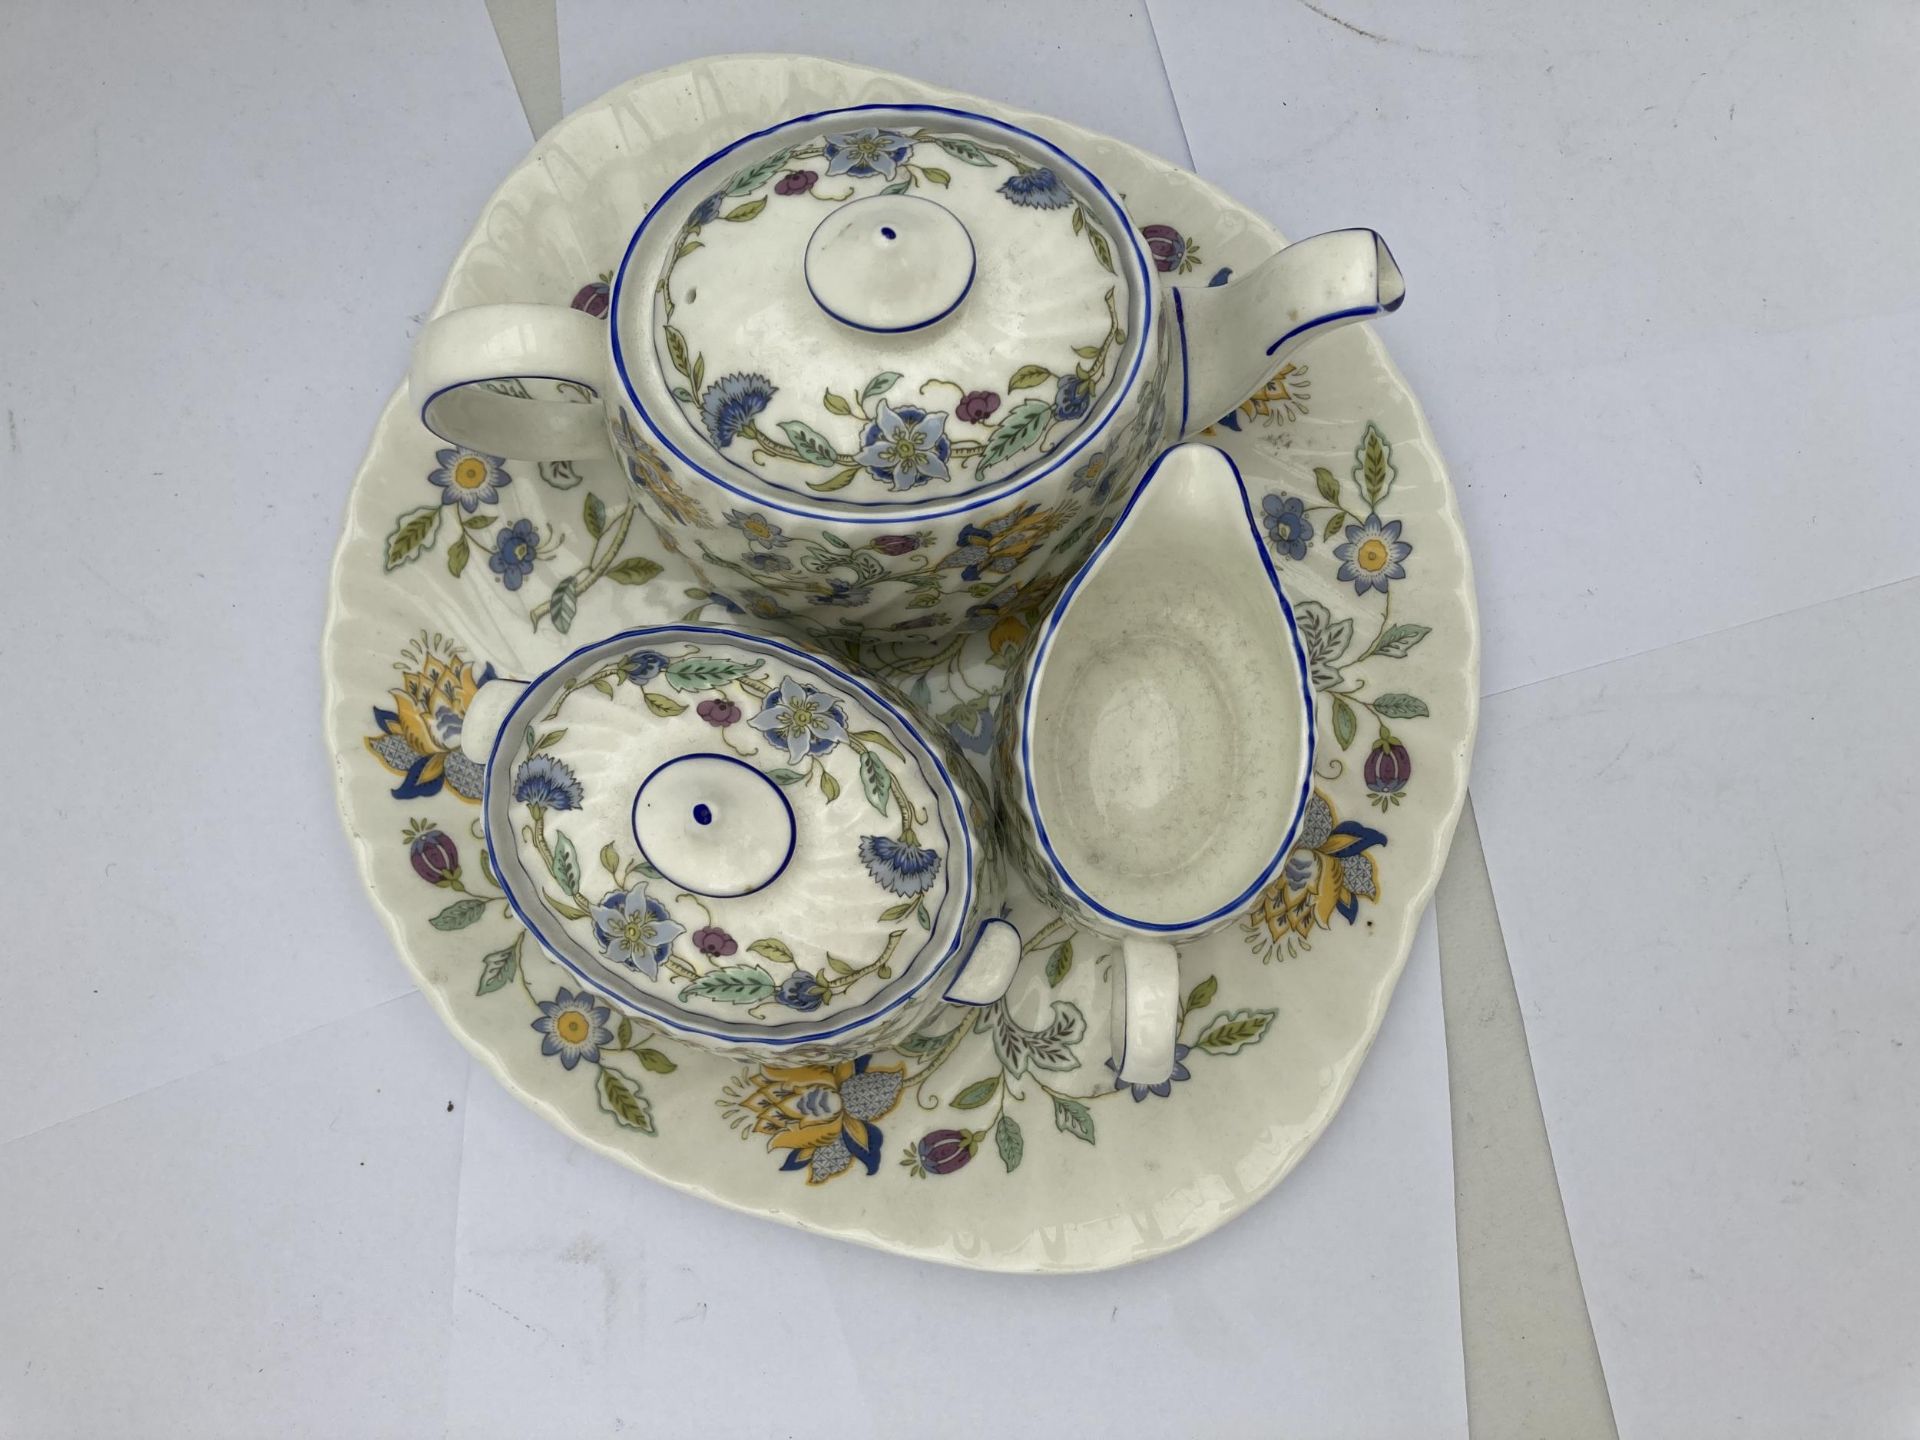 A MINTON HADDON HALL BLUE PATTERN TEA FOR ONE SET - Image 3 of 5